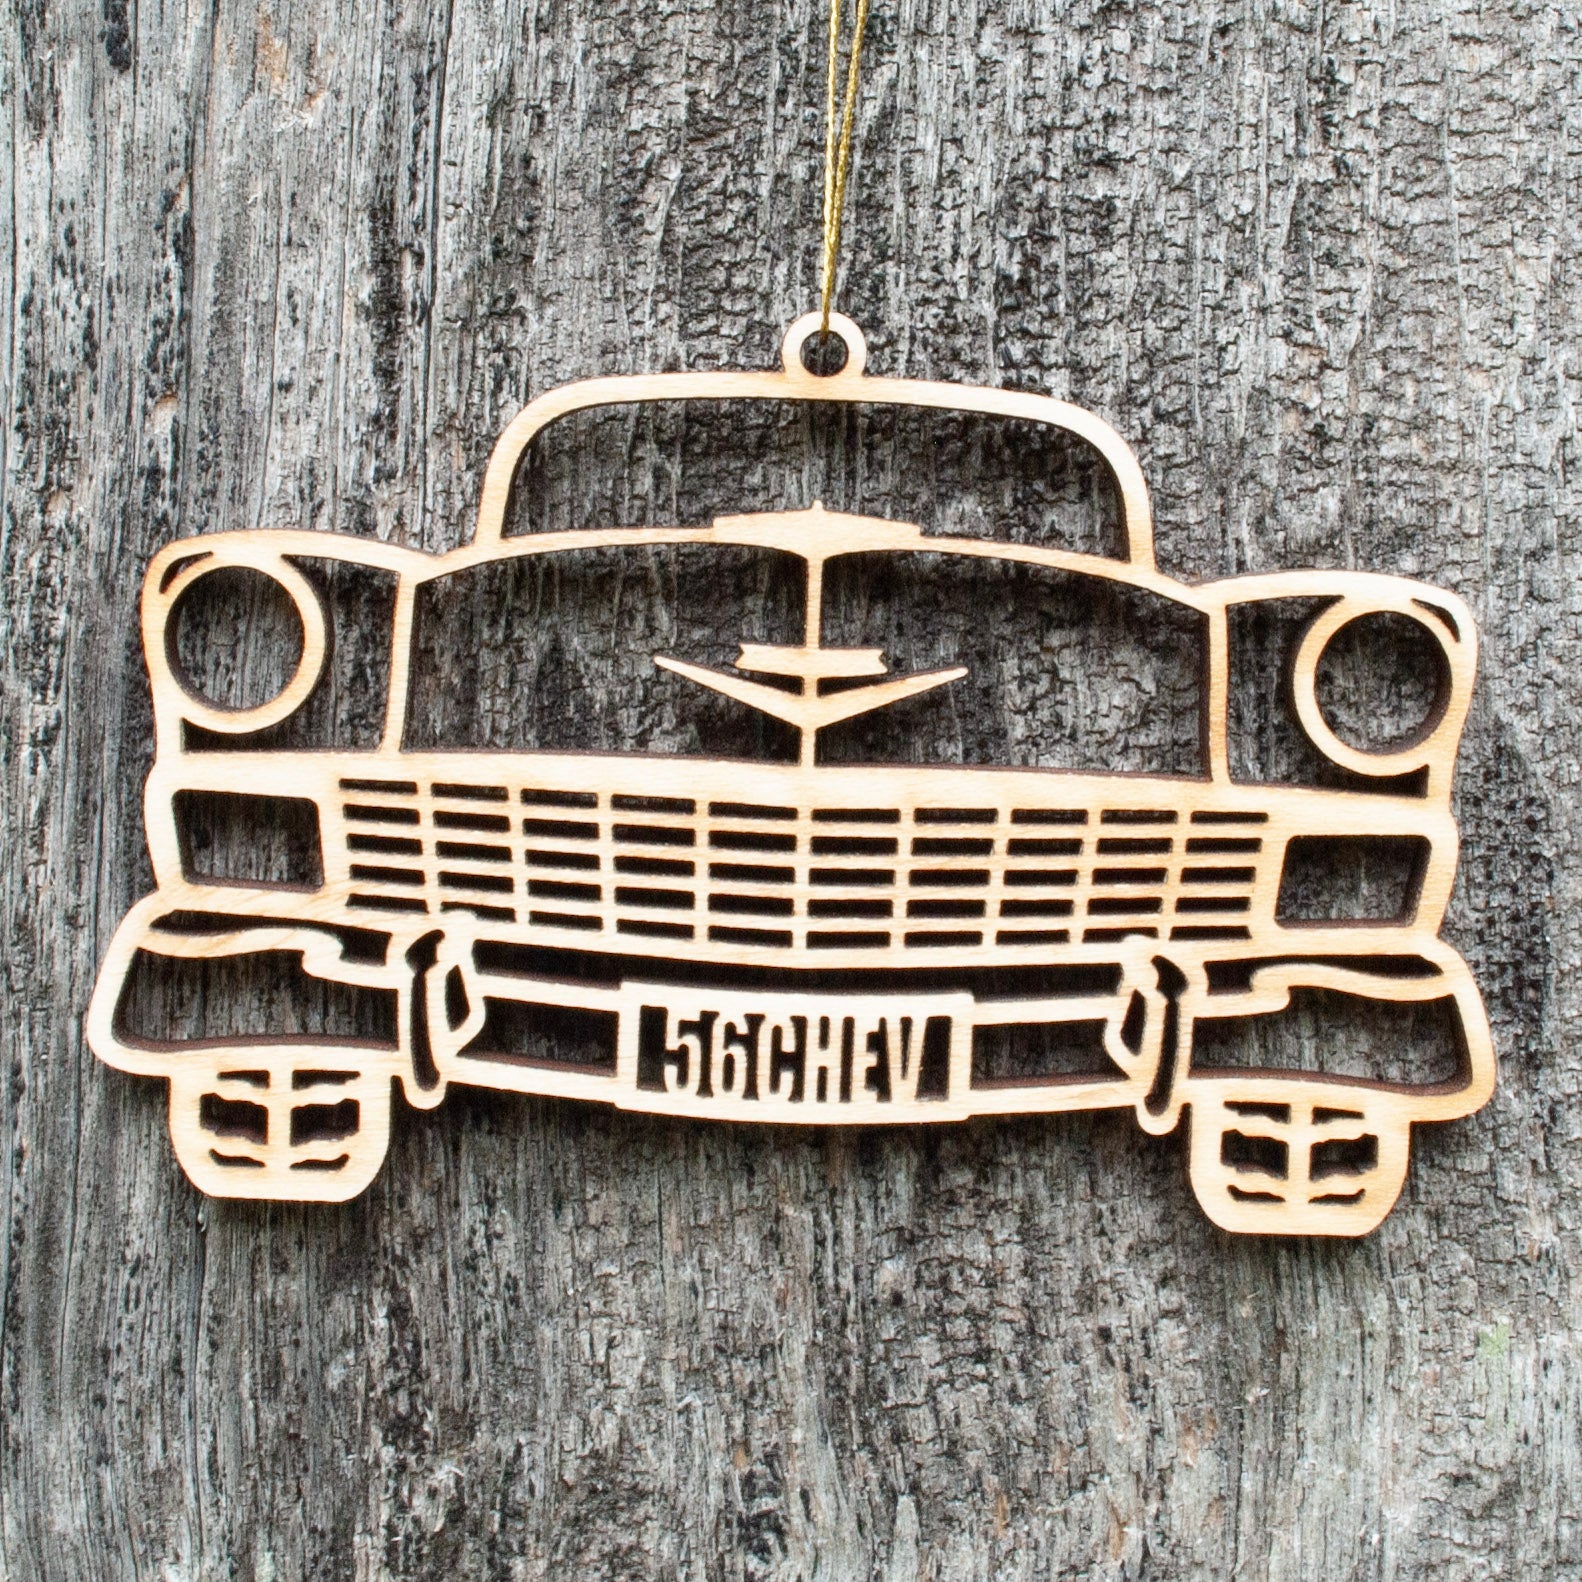 1956 Chevy Ornament